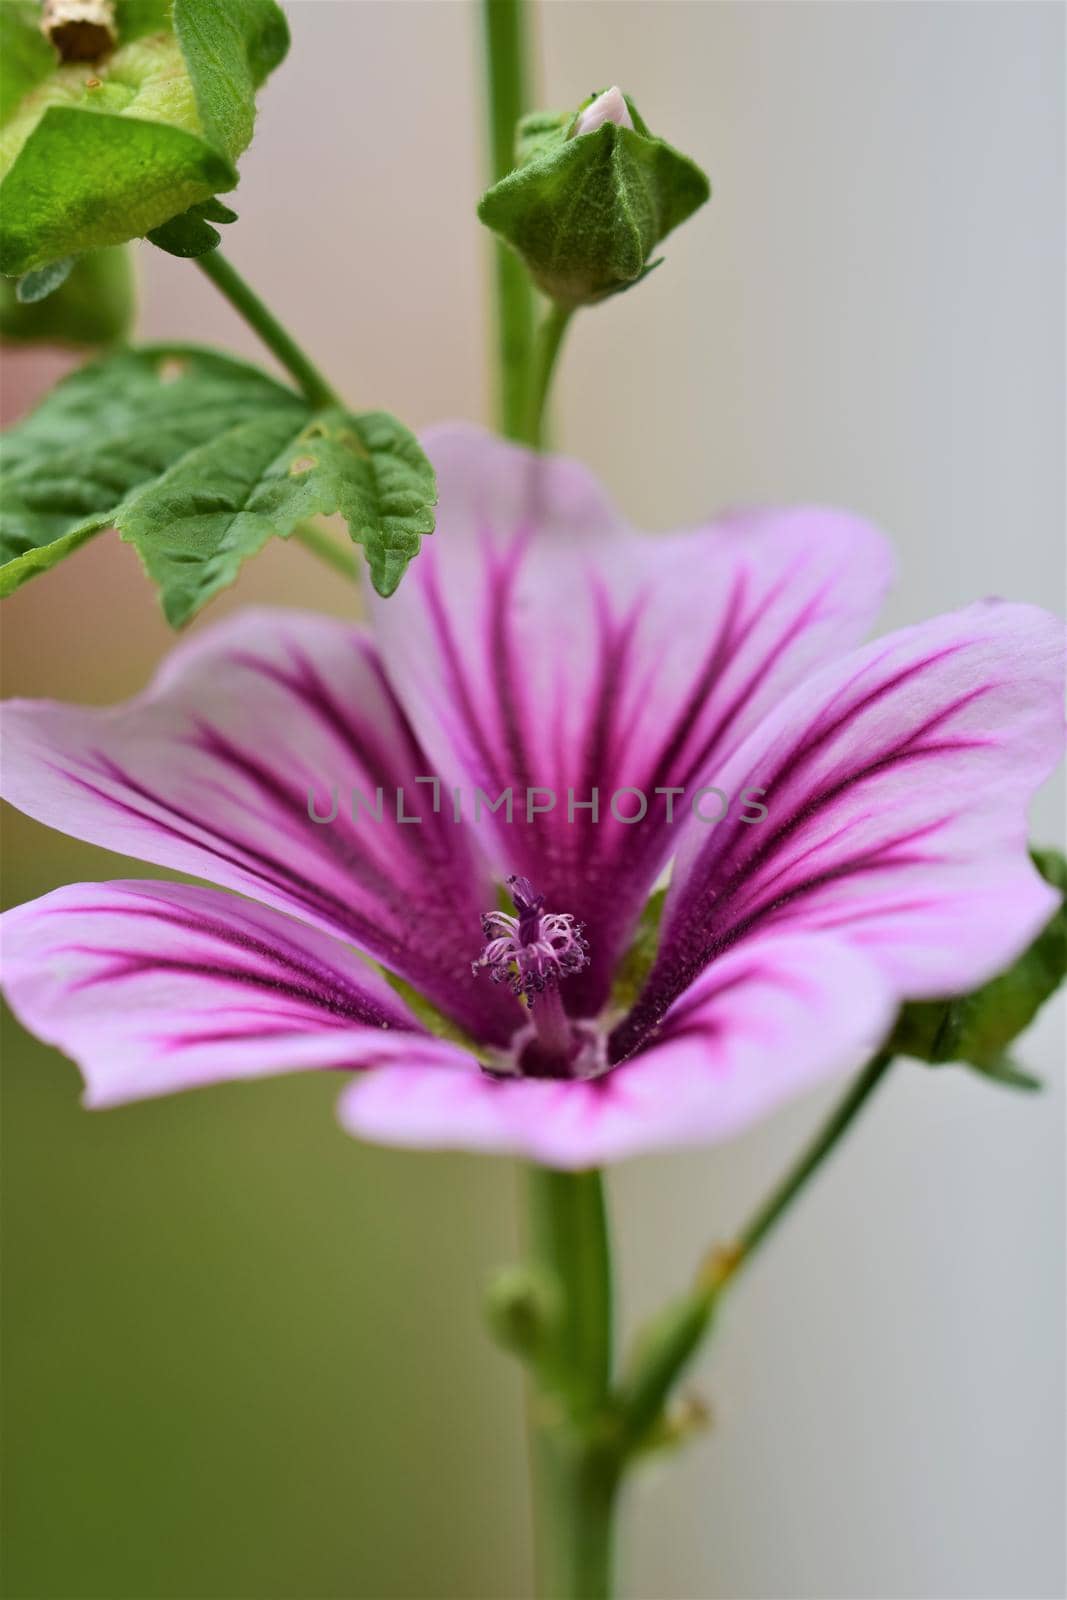 close up of a purple striped mallow flower